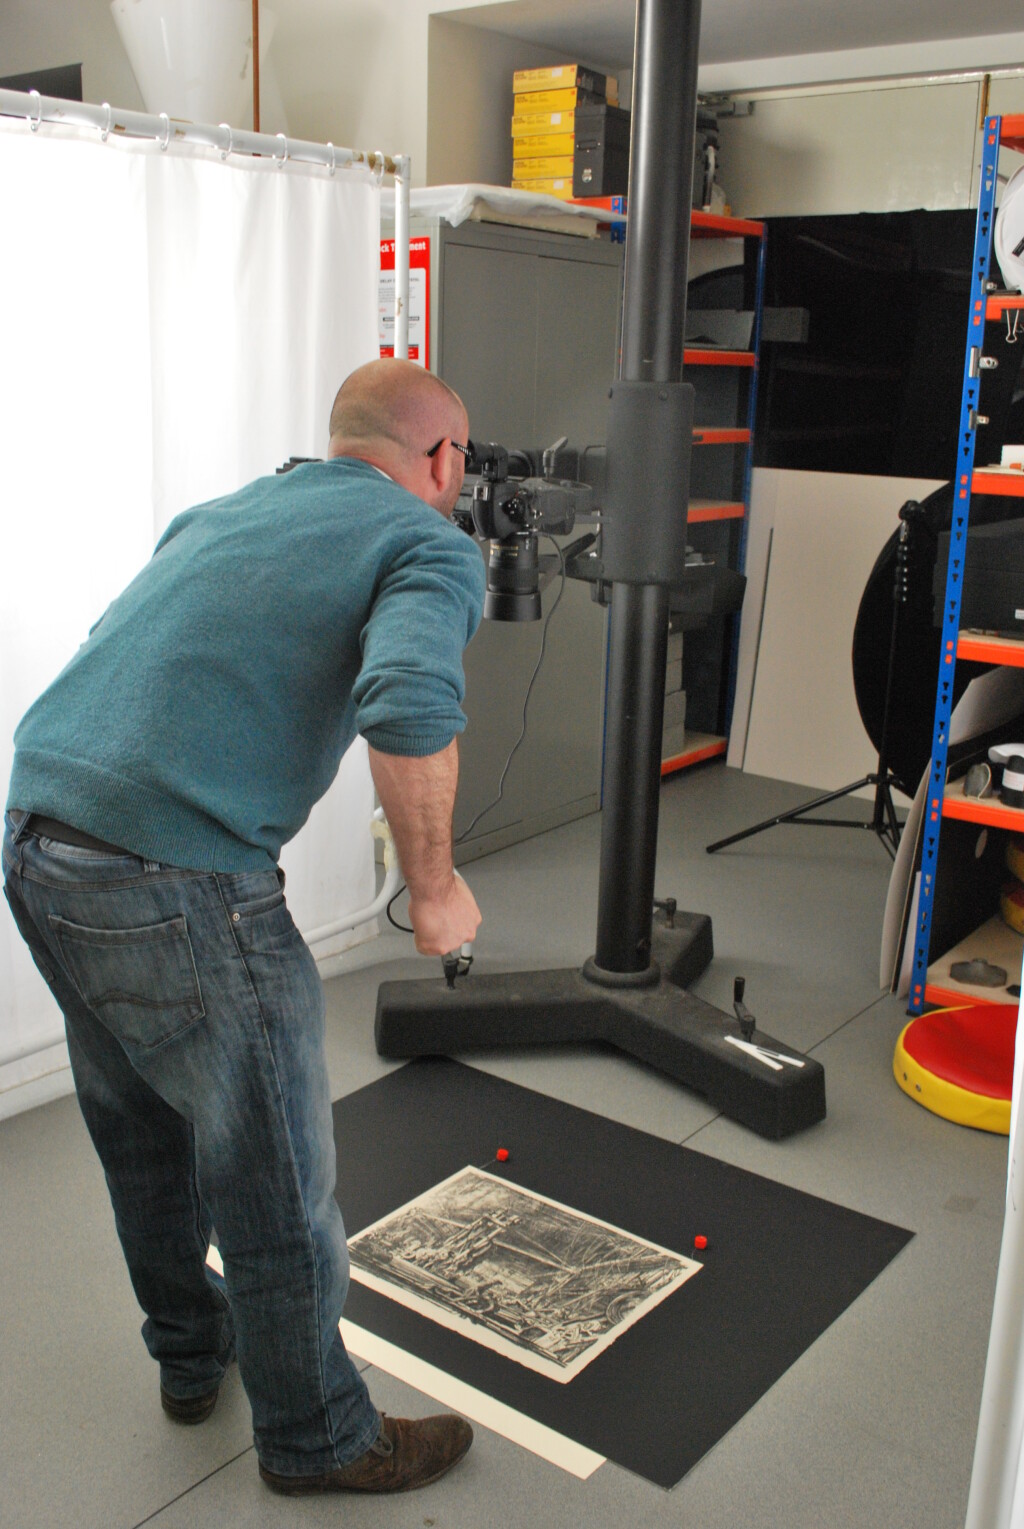 Here you can see our colleague Robin Maggs taking photographs about the prints in the studio. 